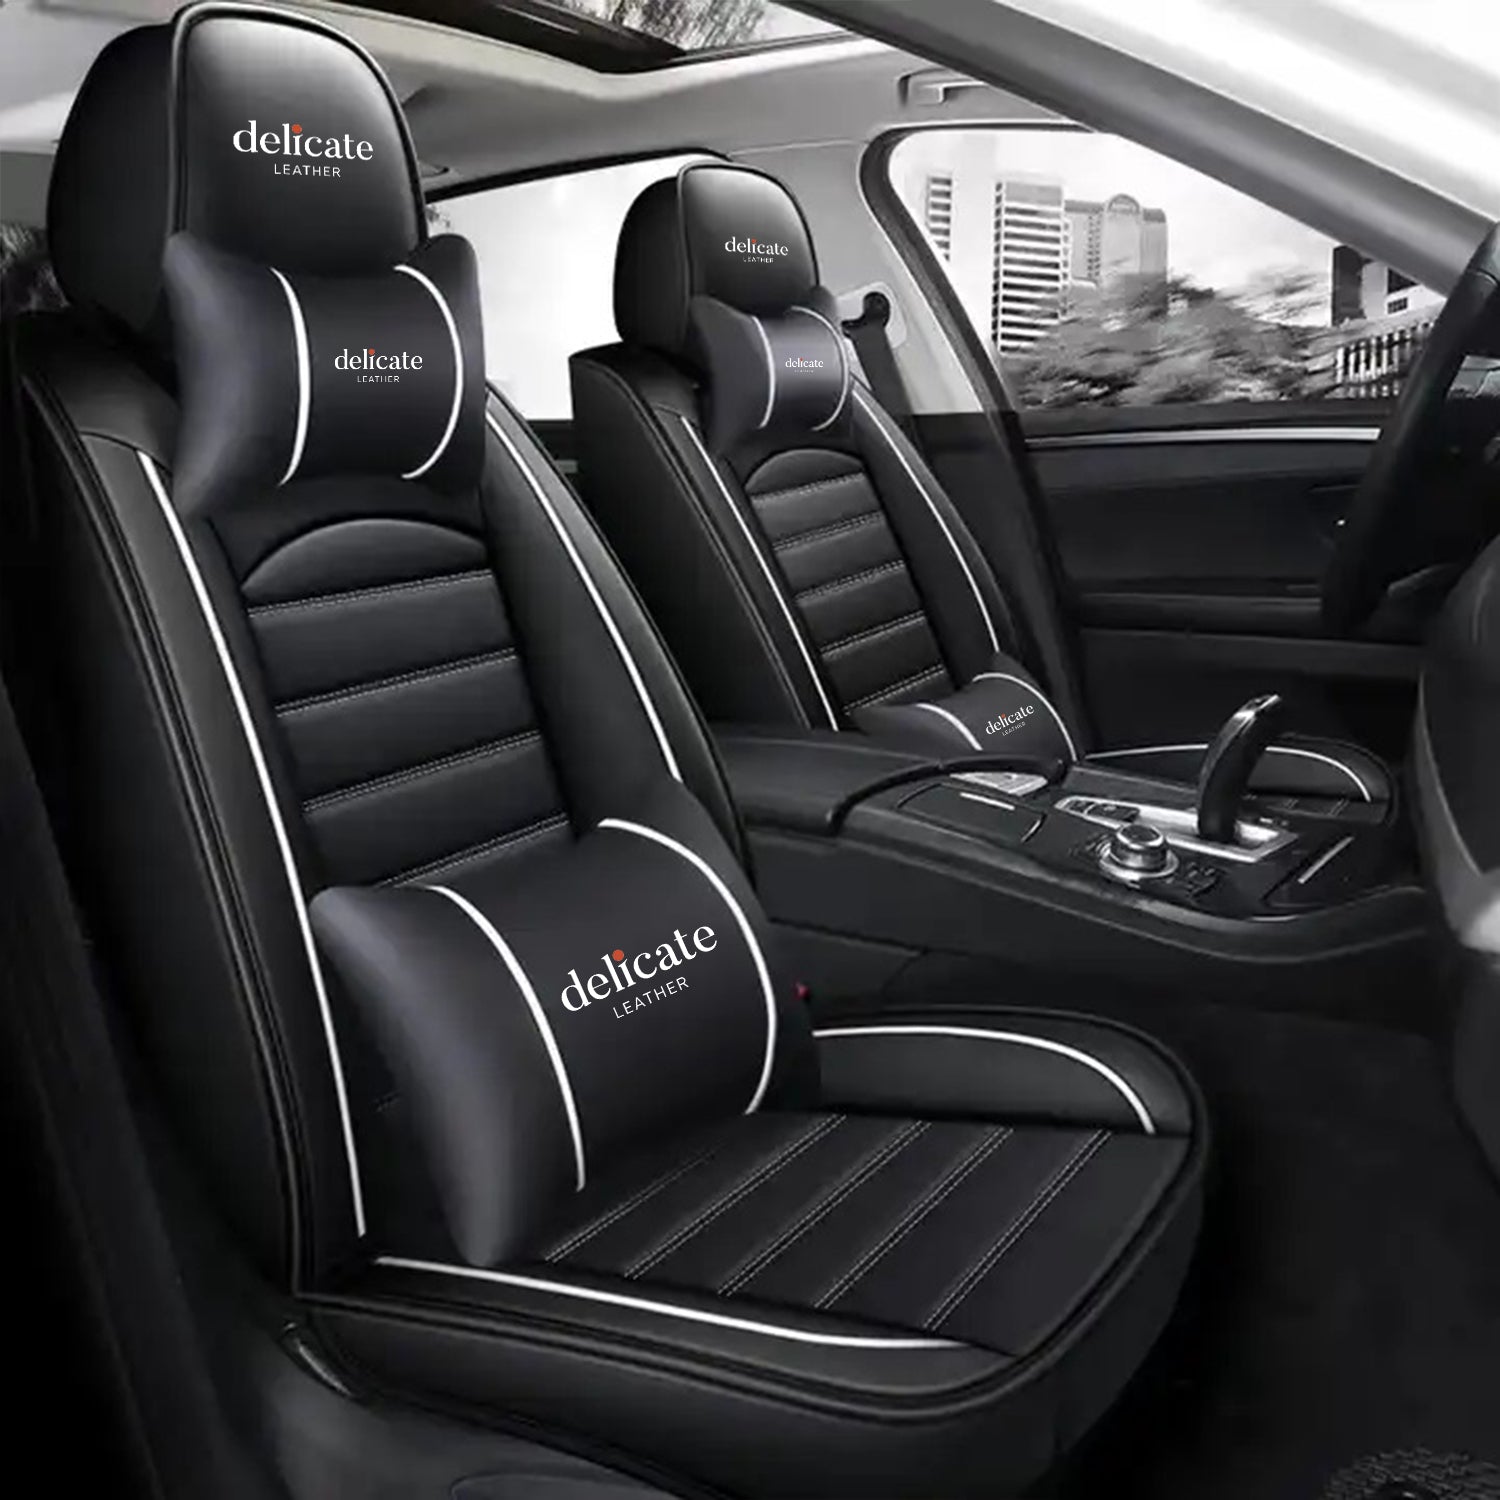 Delicate Leather Car Seat Cover Luxury Leather Car Seat Cover Custom Universal 5pcs Car Seat Cover Set Leather Full Set Universal